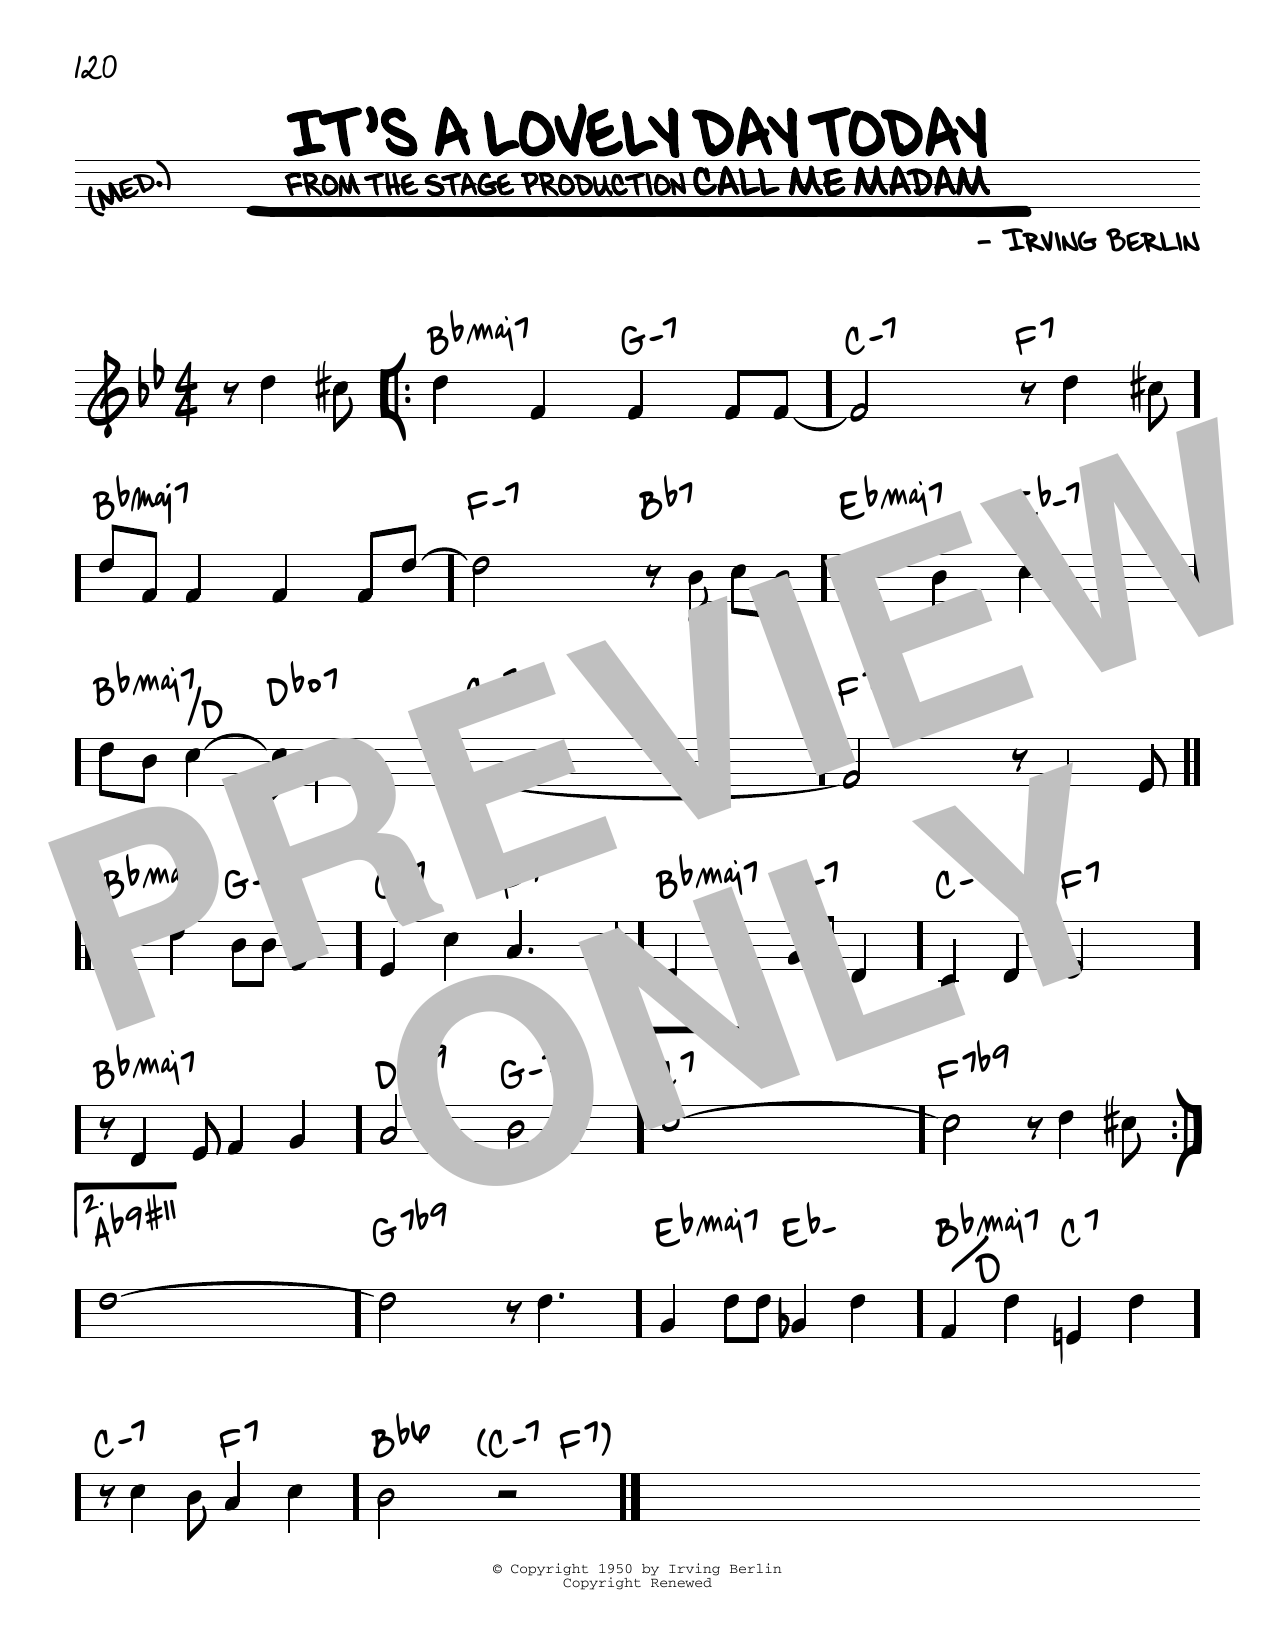 Download Elmo Hope It's A Lovely Day Today Sheet Music